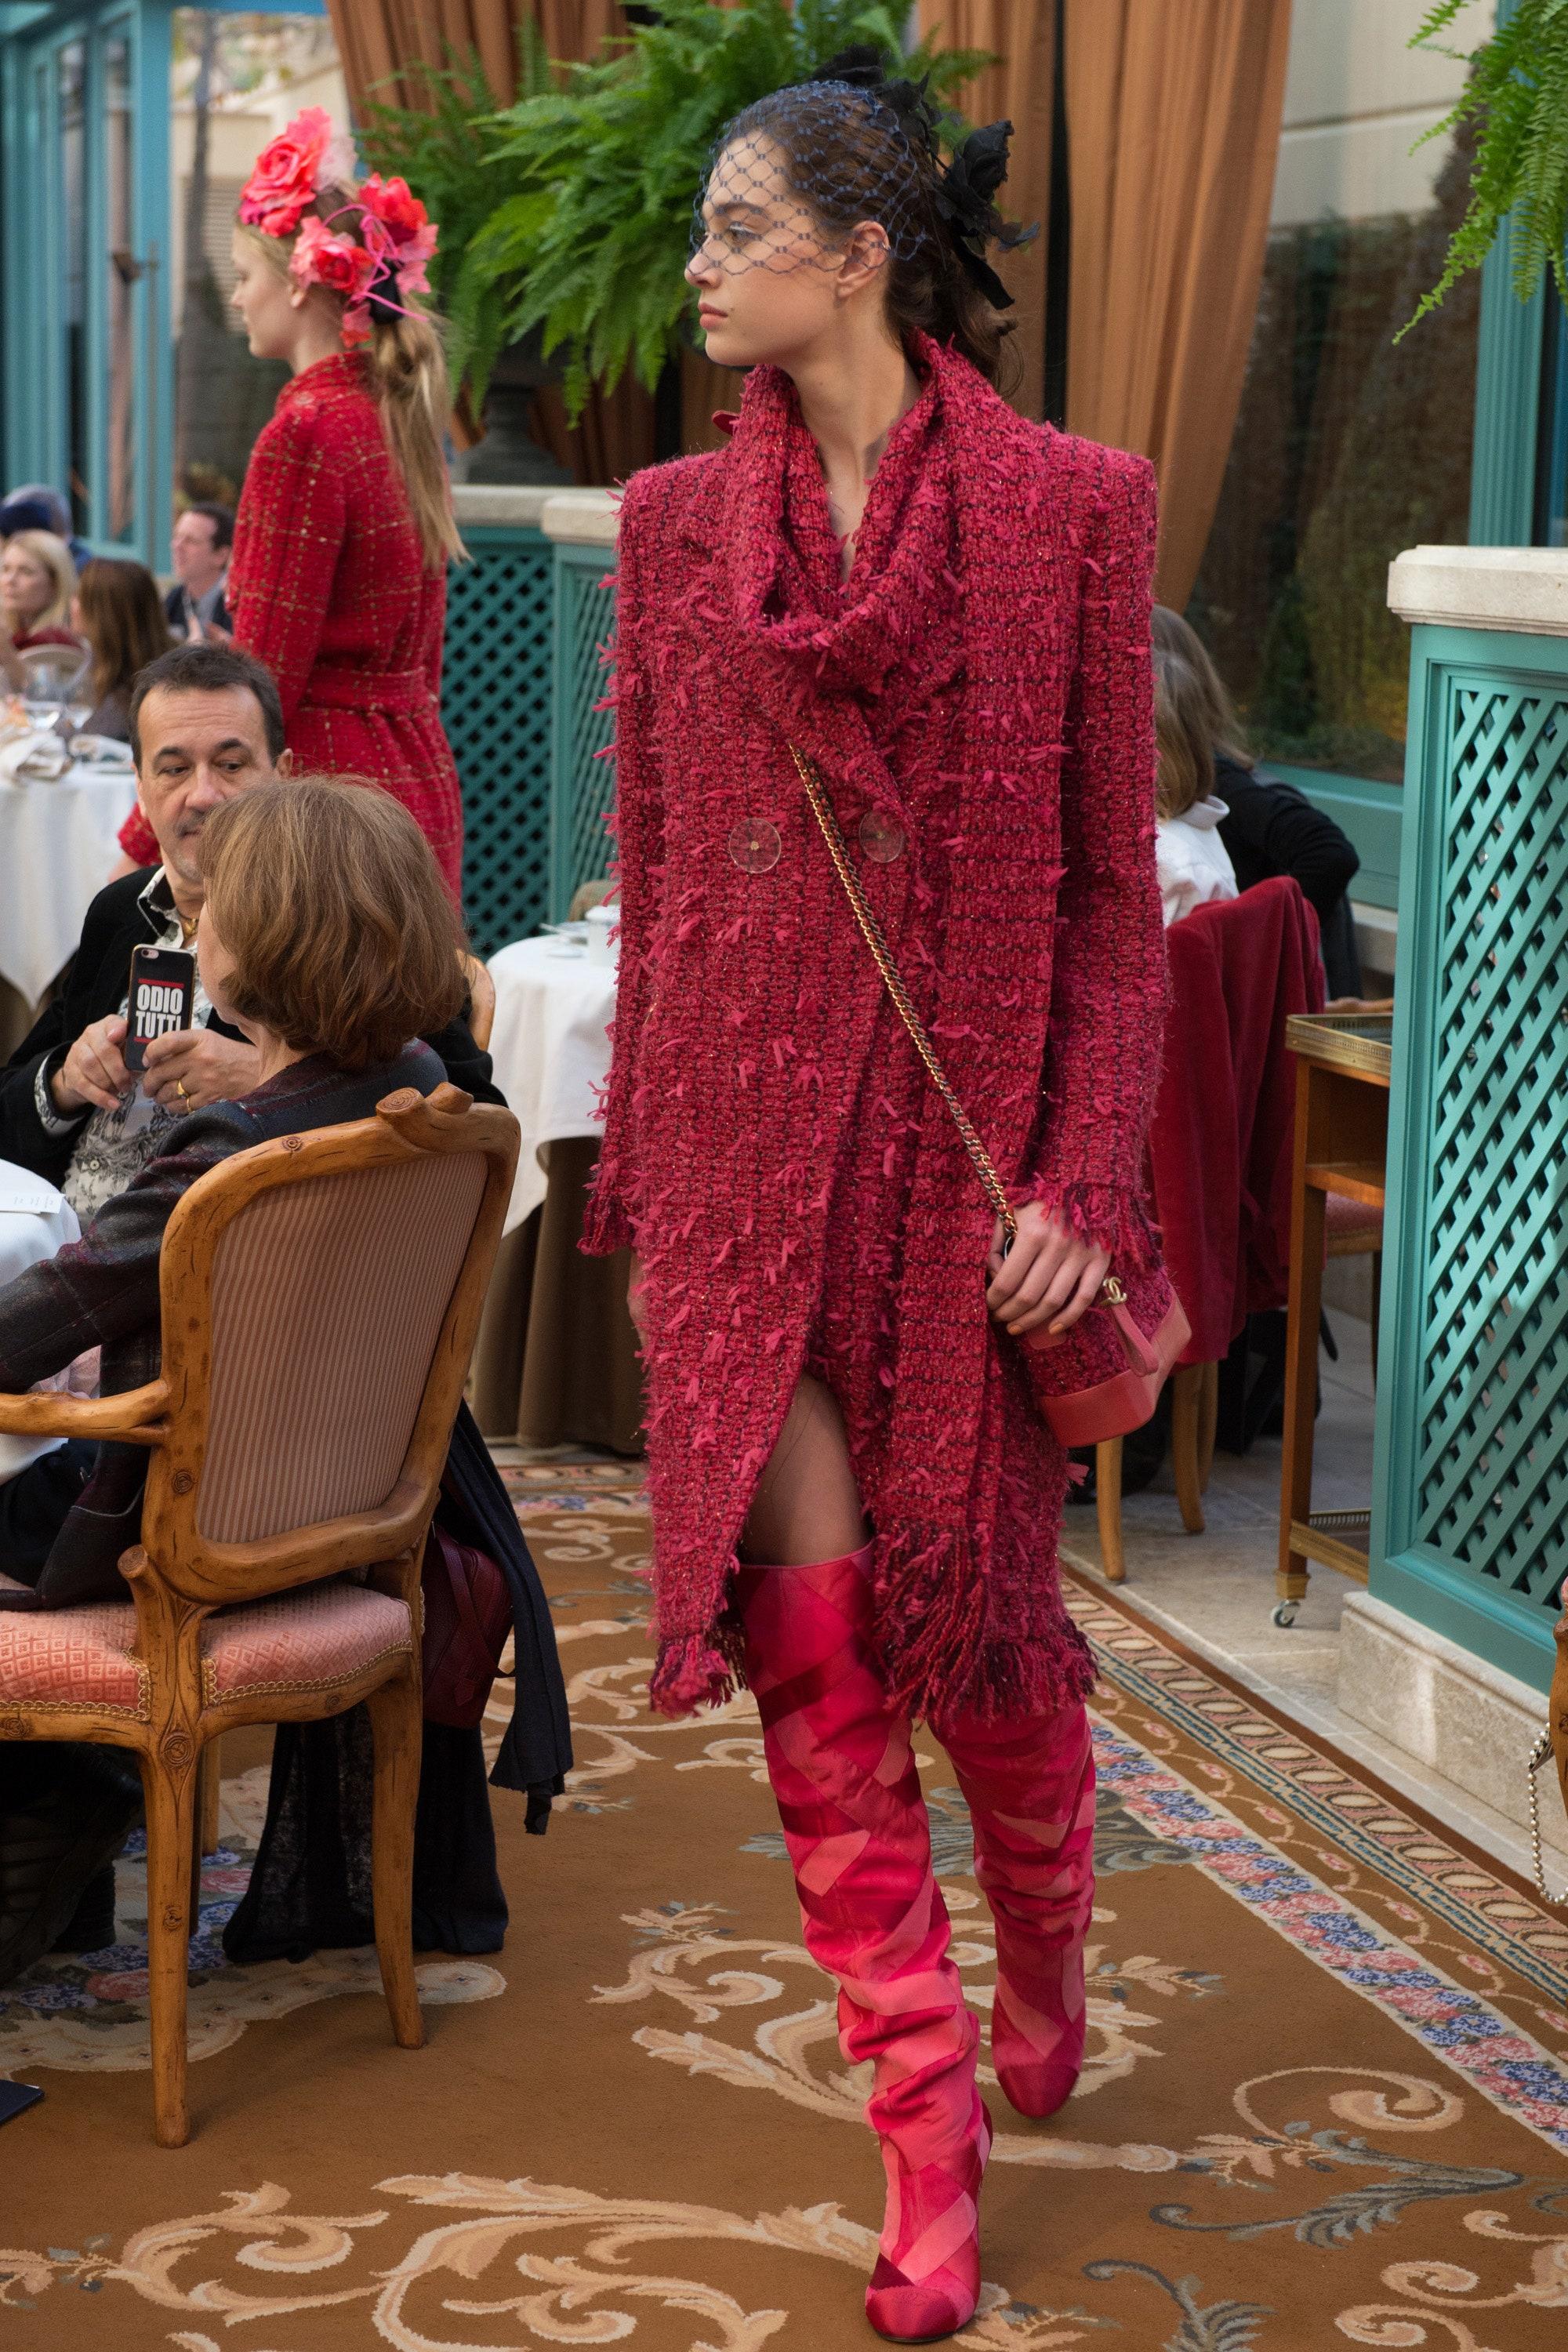 Stunning Chanel raspberry ribbon tweed jacket from Runway of Metier d'Art Paris / Cosmopolite  Collection, 2017 Pre-Fall, 17a
- super beautiful berry color shade - not bright but very pleasant to eye!
- double rows of CC logo lucite buttons 
- full